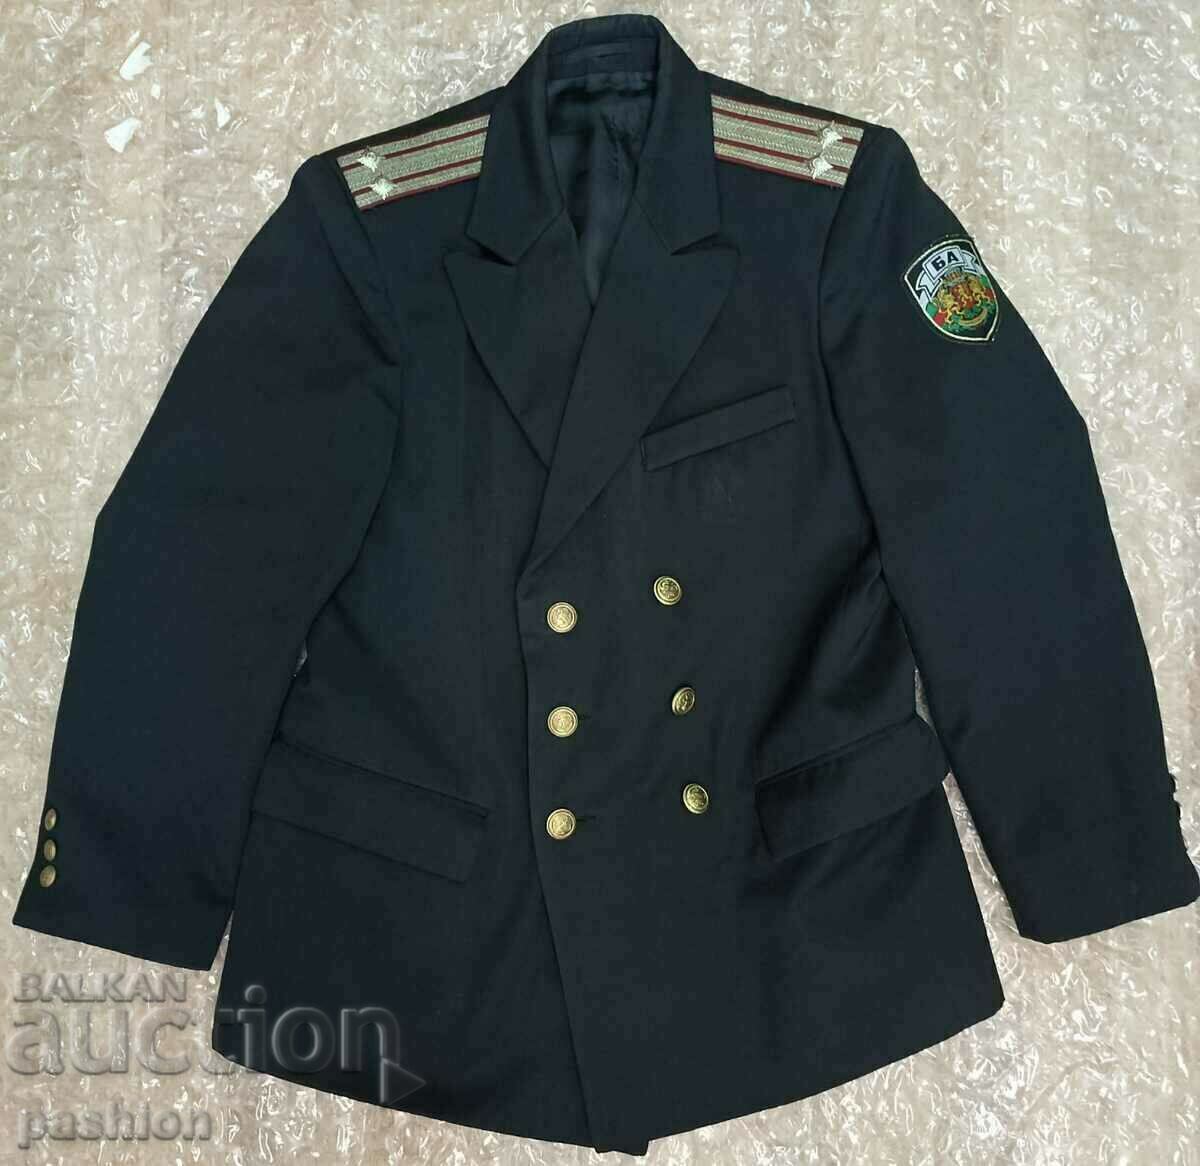 navy jacket DISCOUNT and gift